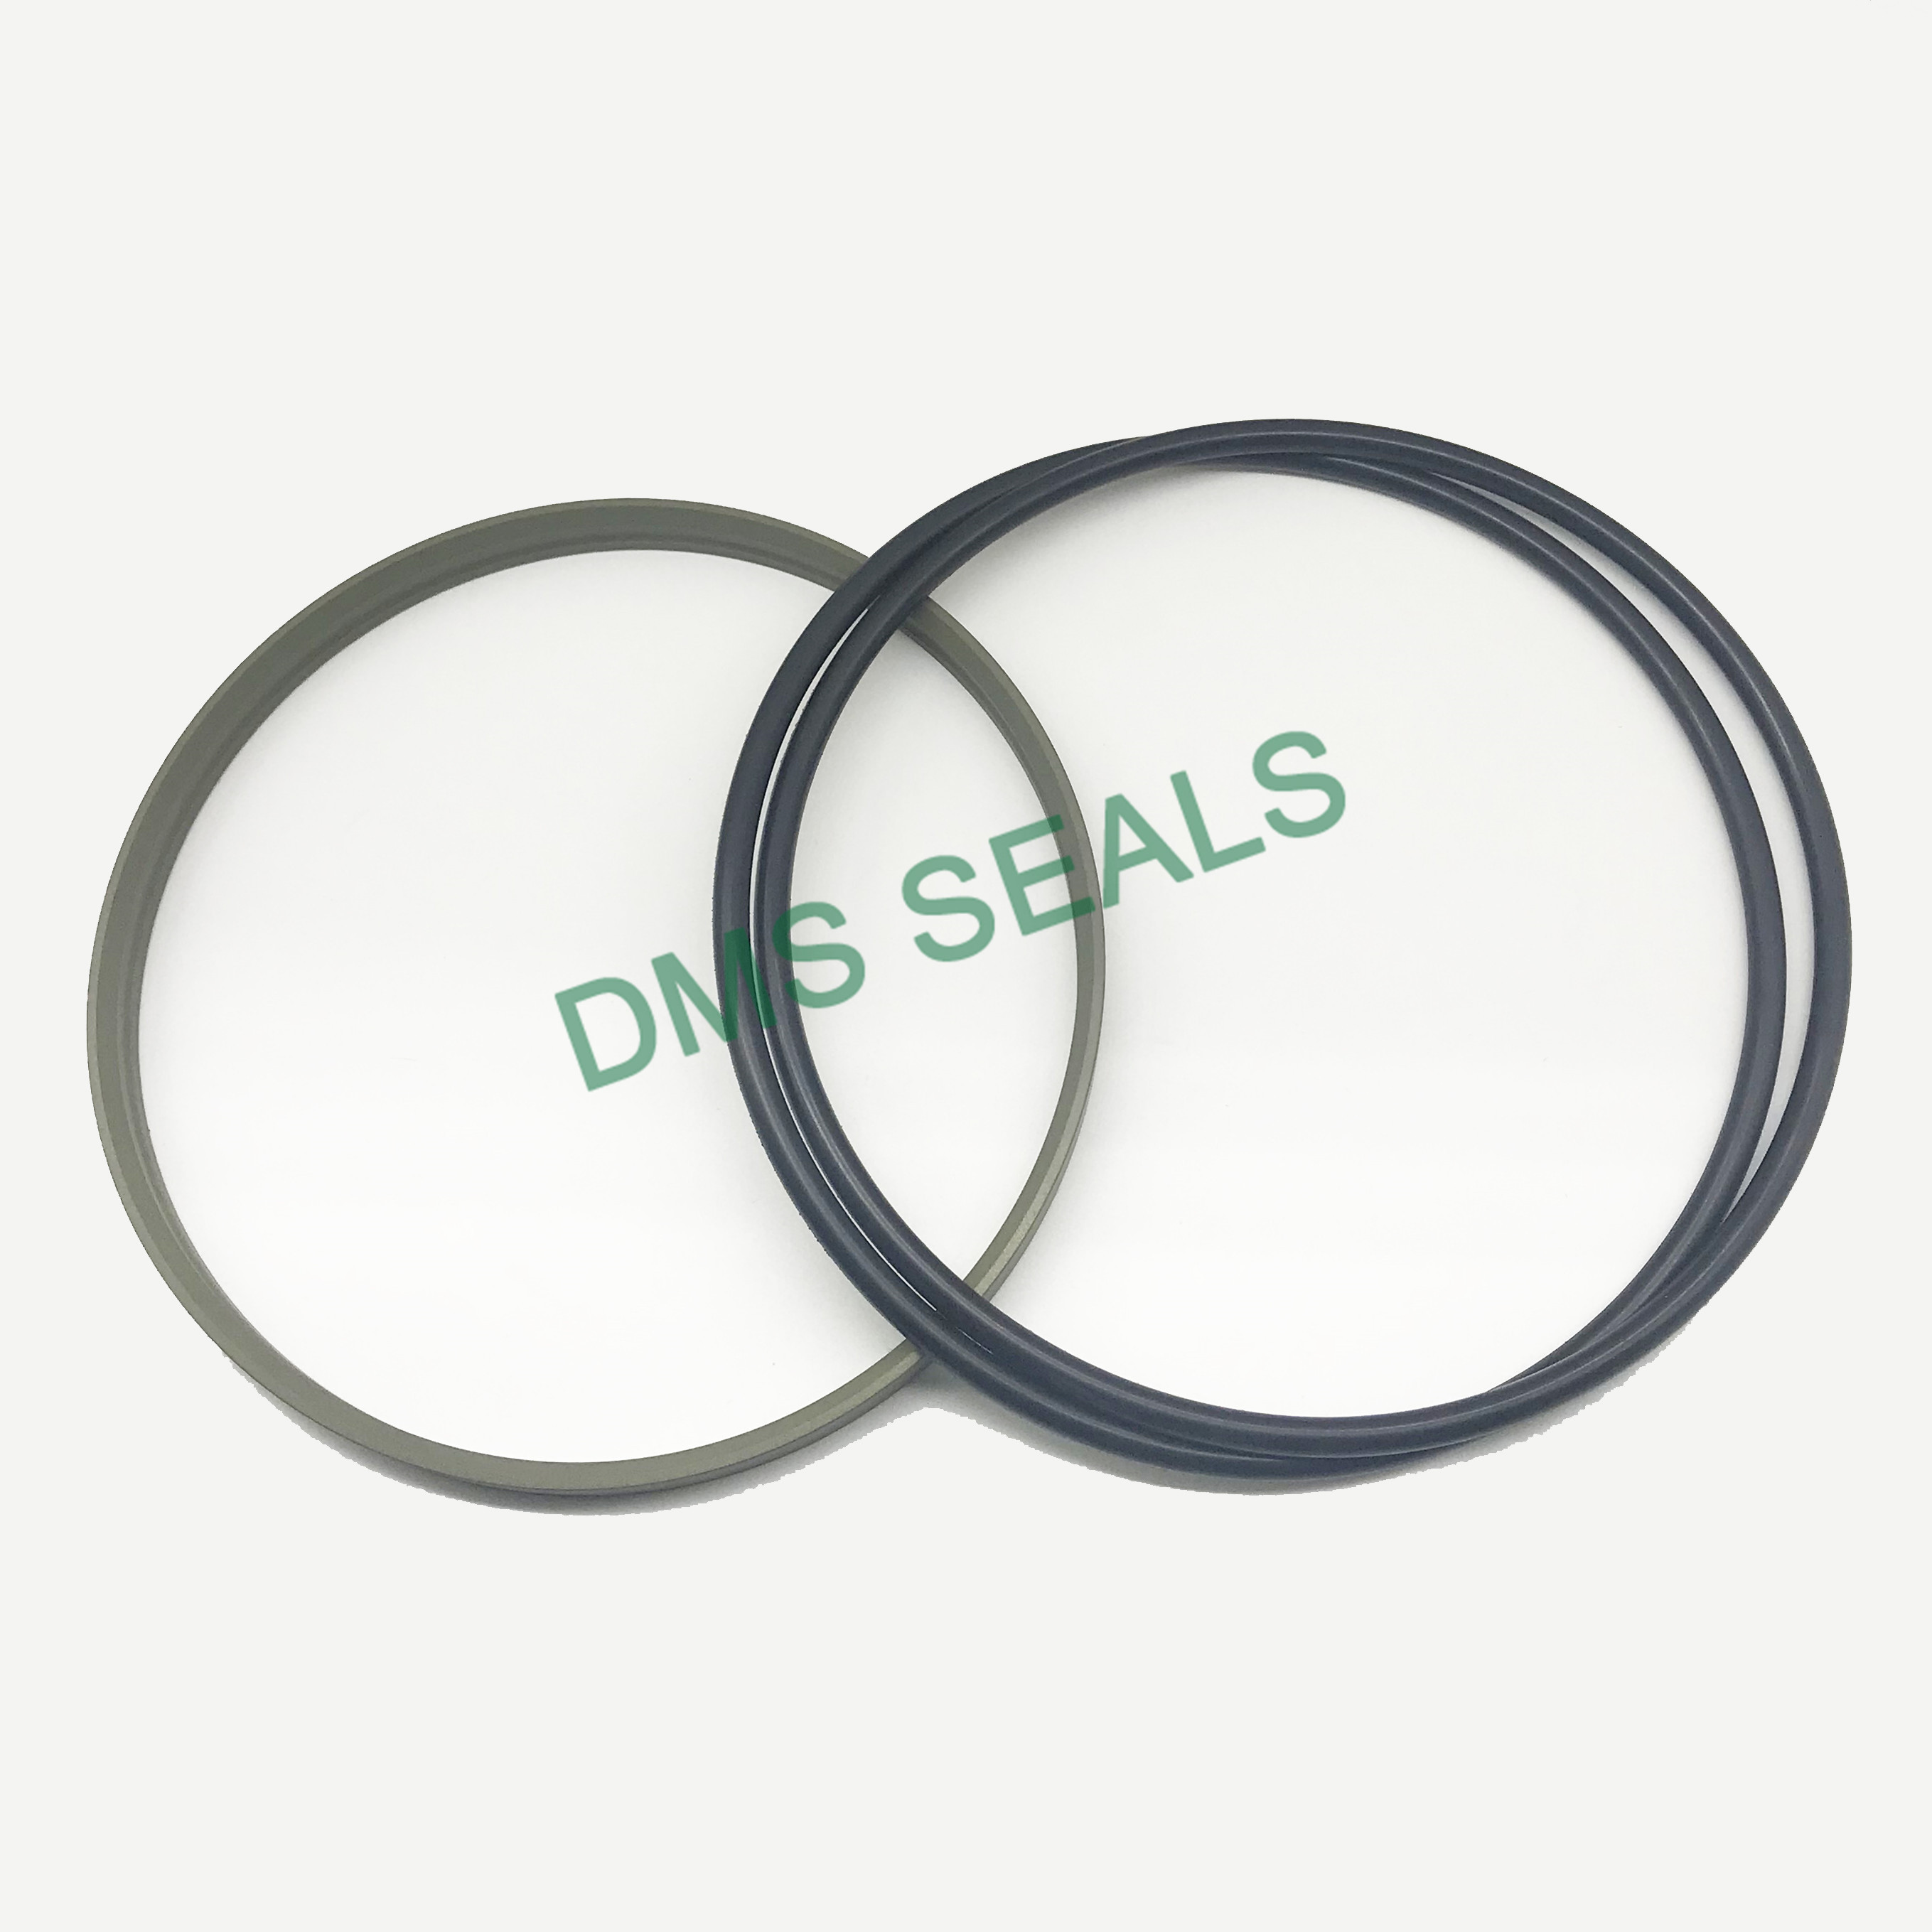 product-DMS Seals u cup seal sizes wholesale for cranes-DMS Seals-img